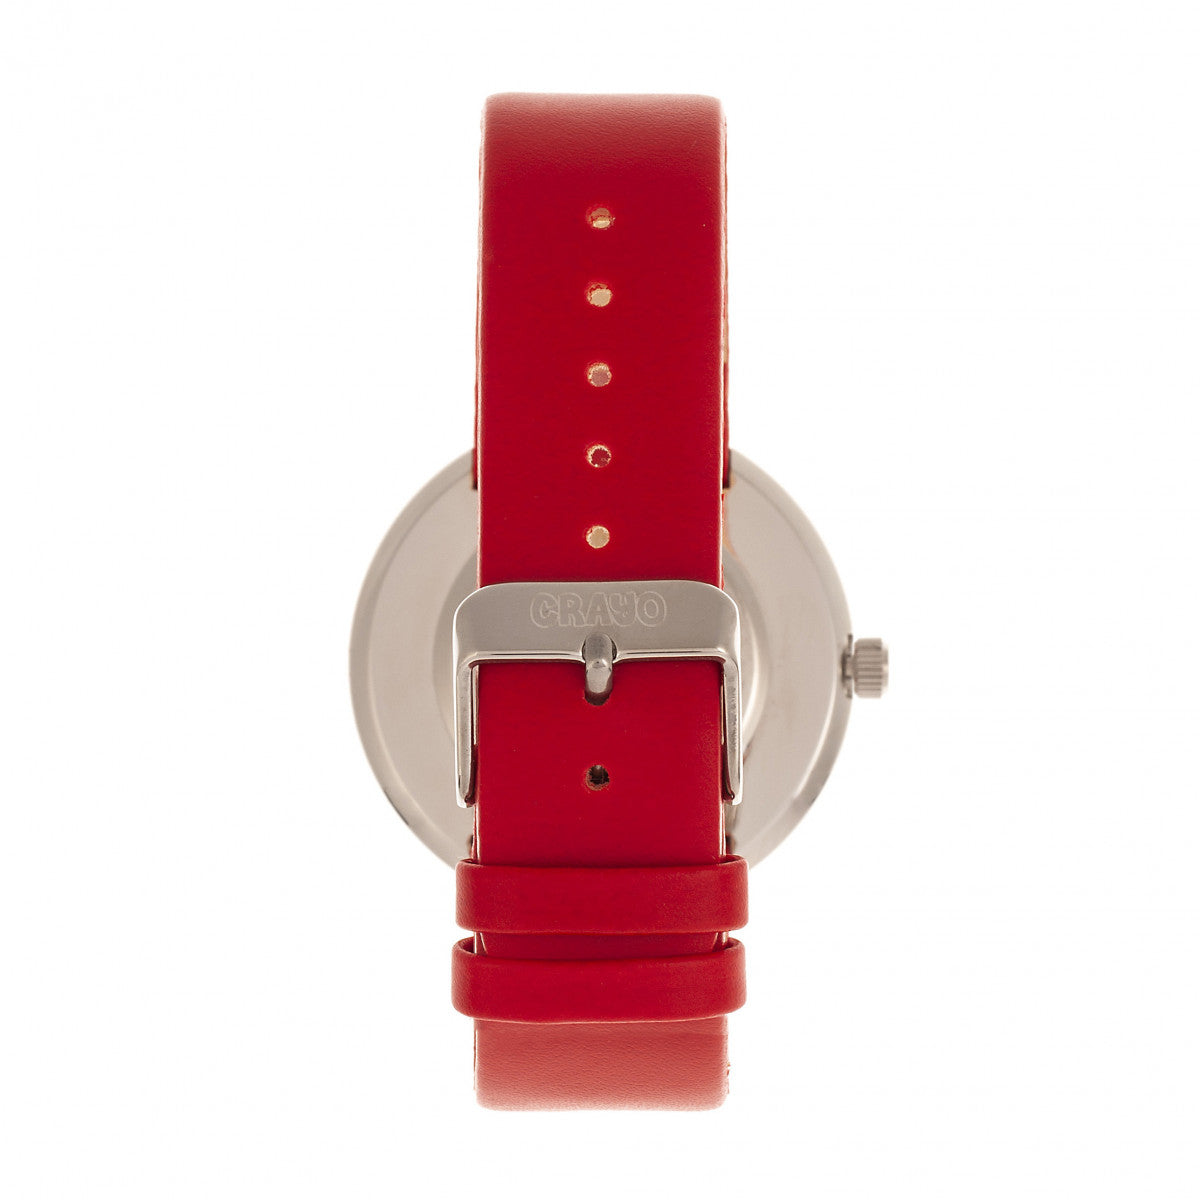 Crayo Button Leather-Band Unisex Watch w/ Day/Date - Red - CRACR0206